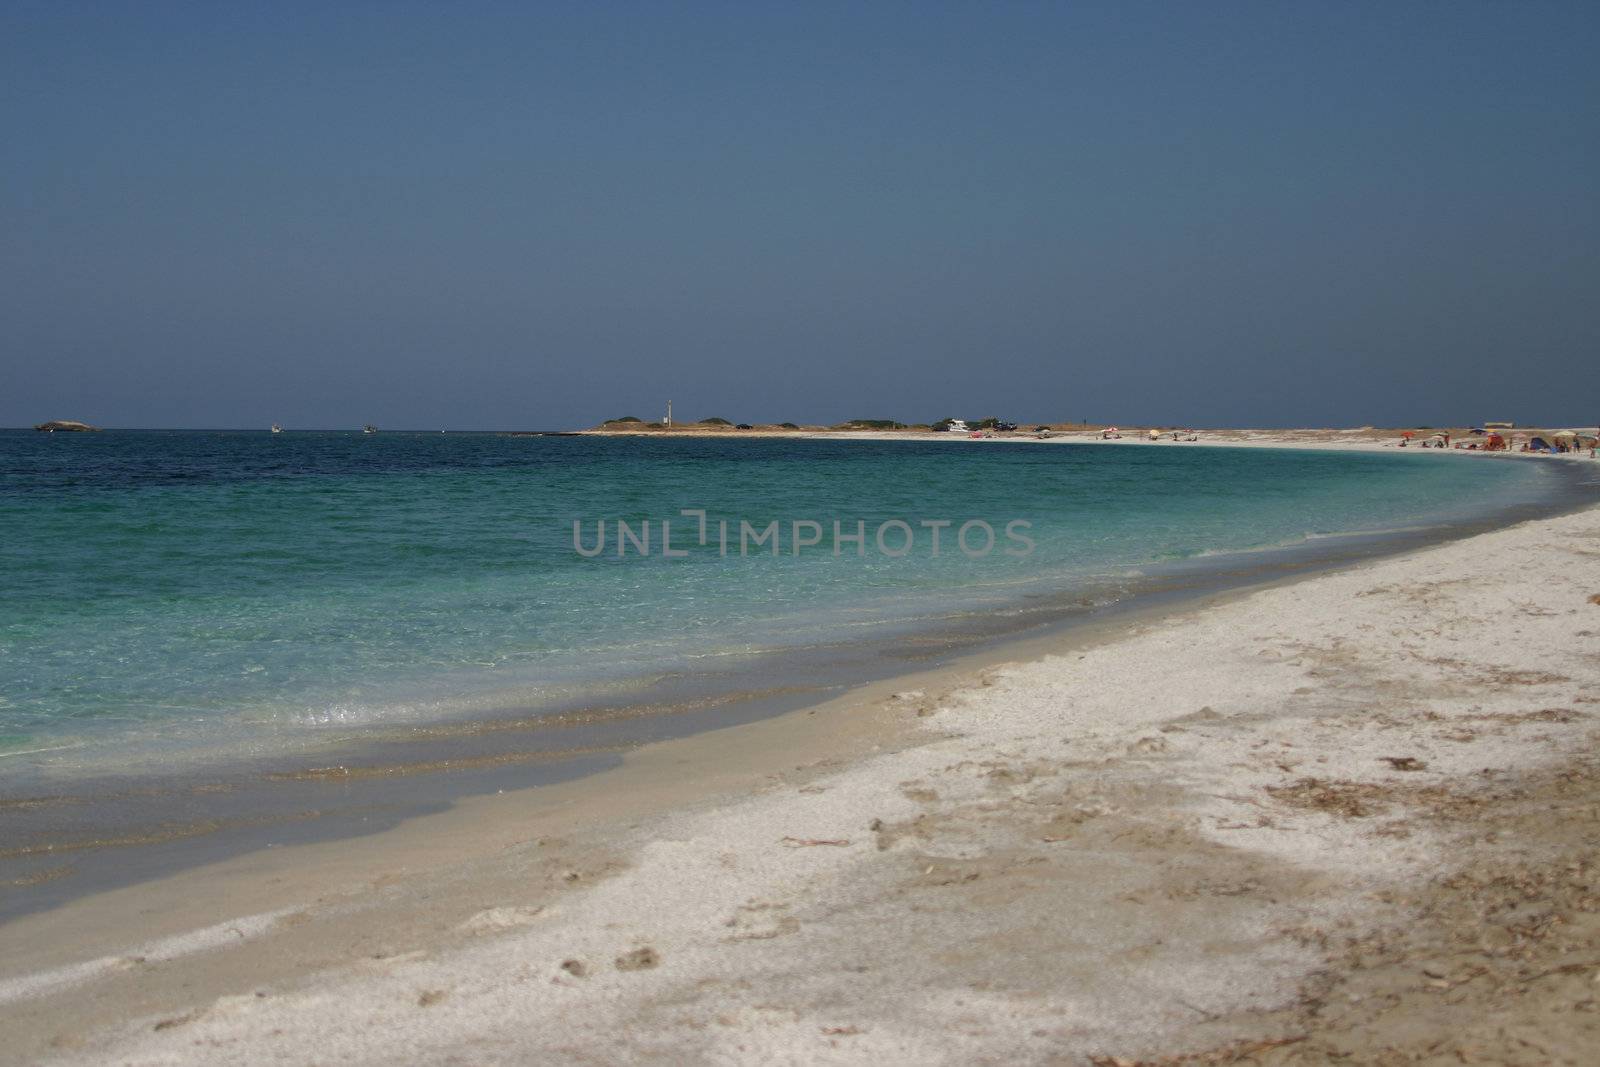 beach, coast, coastal, color, ecology, foam, landscape, liquid, marine, motion, nature, Mediterranean, clear, fish,  fish eye, reflection, scenic, sea, beach, sand, sky, spray, sunny, water, weather, sea, beaches, coast, destination,  leisure, lifestyle, paradise, relaxing, relax, travel, tranquil, tranquility, vacation, landscape, Italy, Sardinia island, desert, clouds, sailing, wind, sand, dunes, cloud, destination, ecotourism, europe, european, field, italian, leisure, lifestyle, location, natural, nature, recreation, place, summer, summertime, tourism, tourist, travel, vacation, voyage,